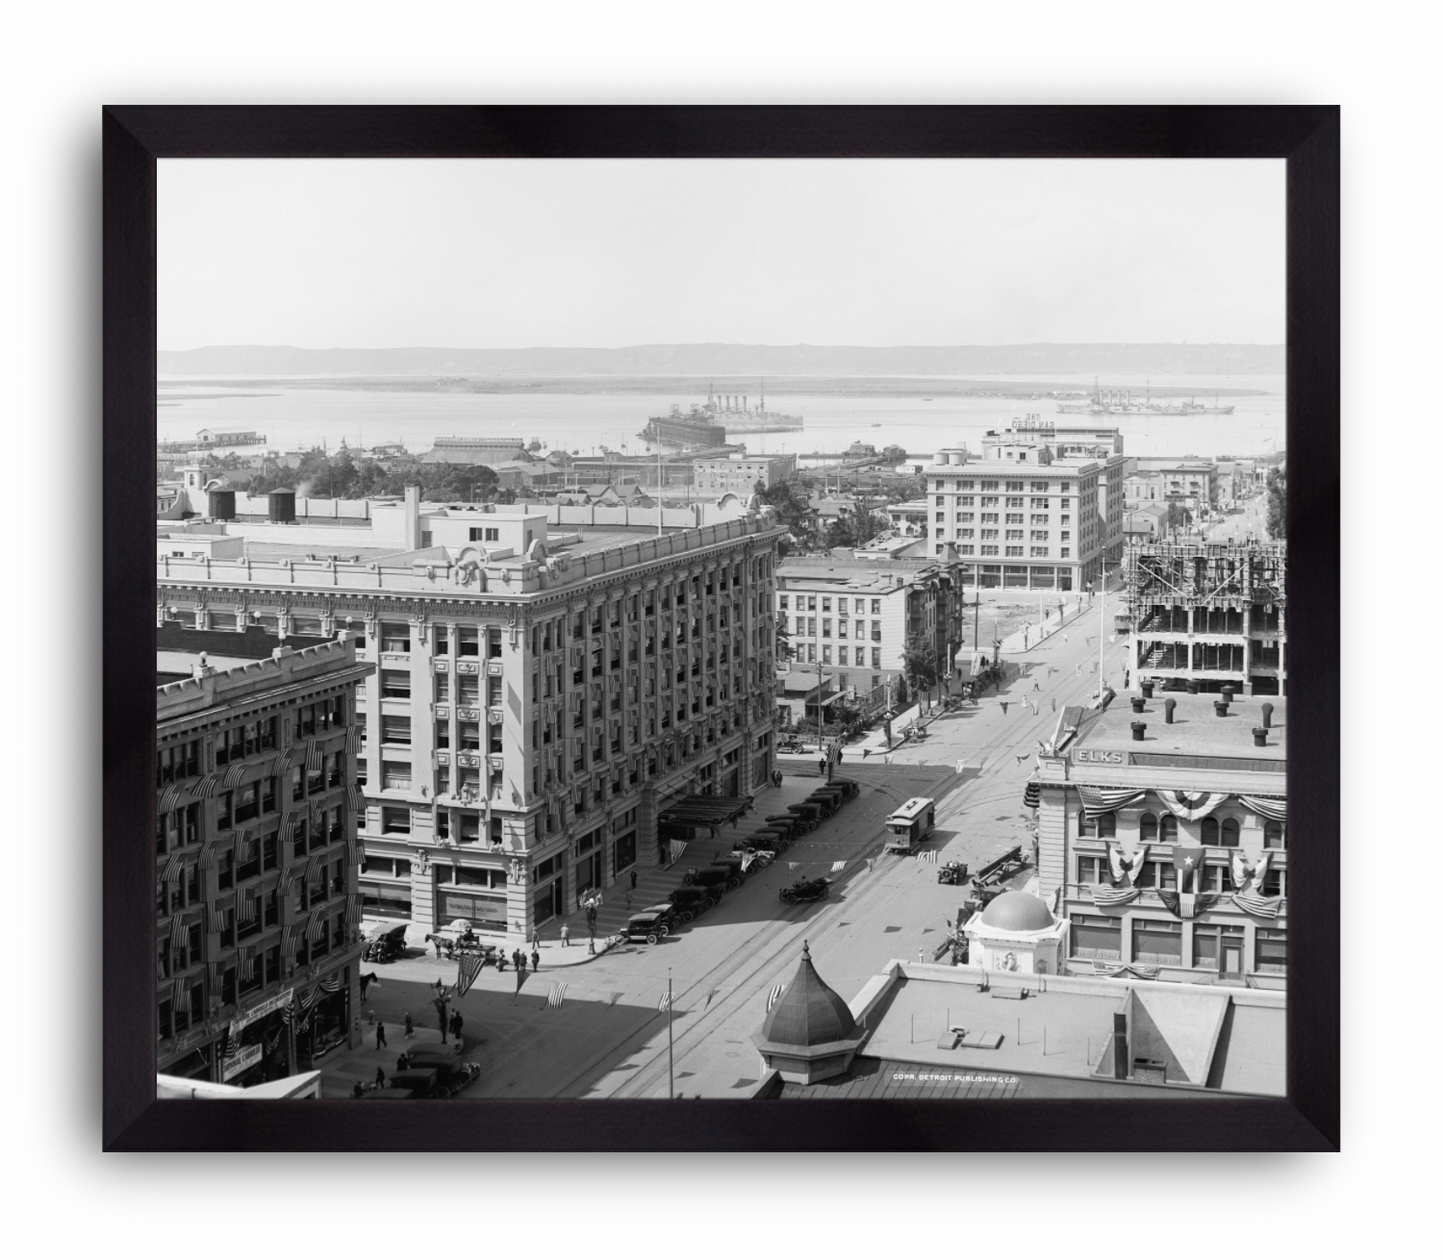 San Diego and Bay from U.S. Grant Hotel, 1910s